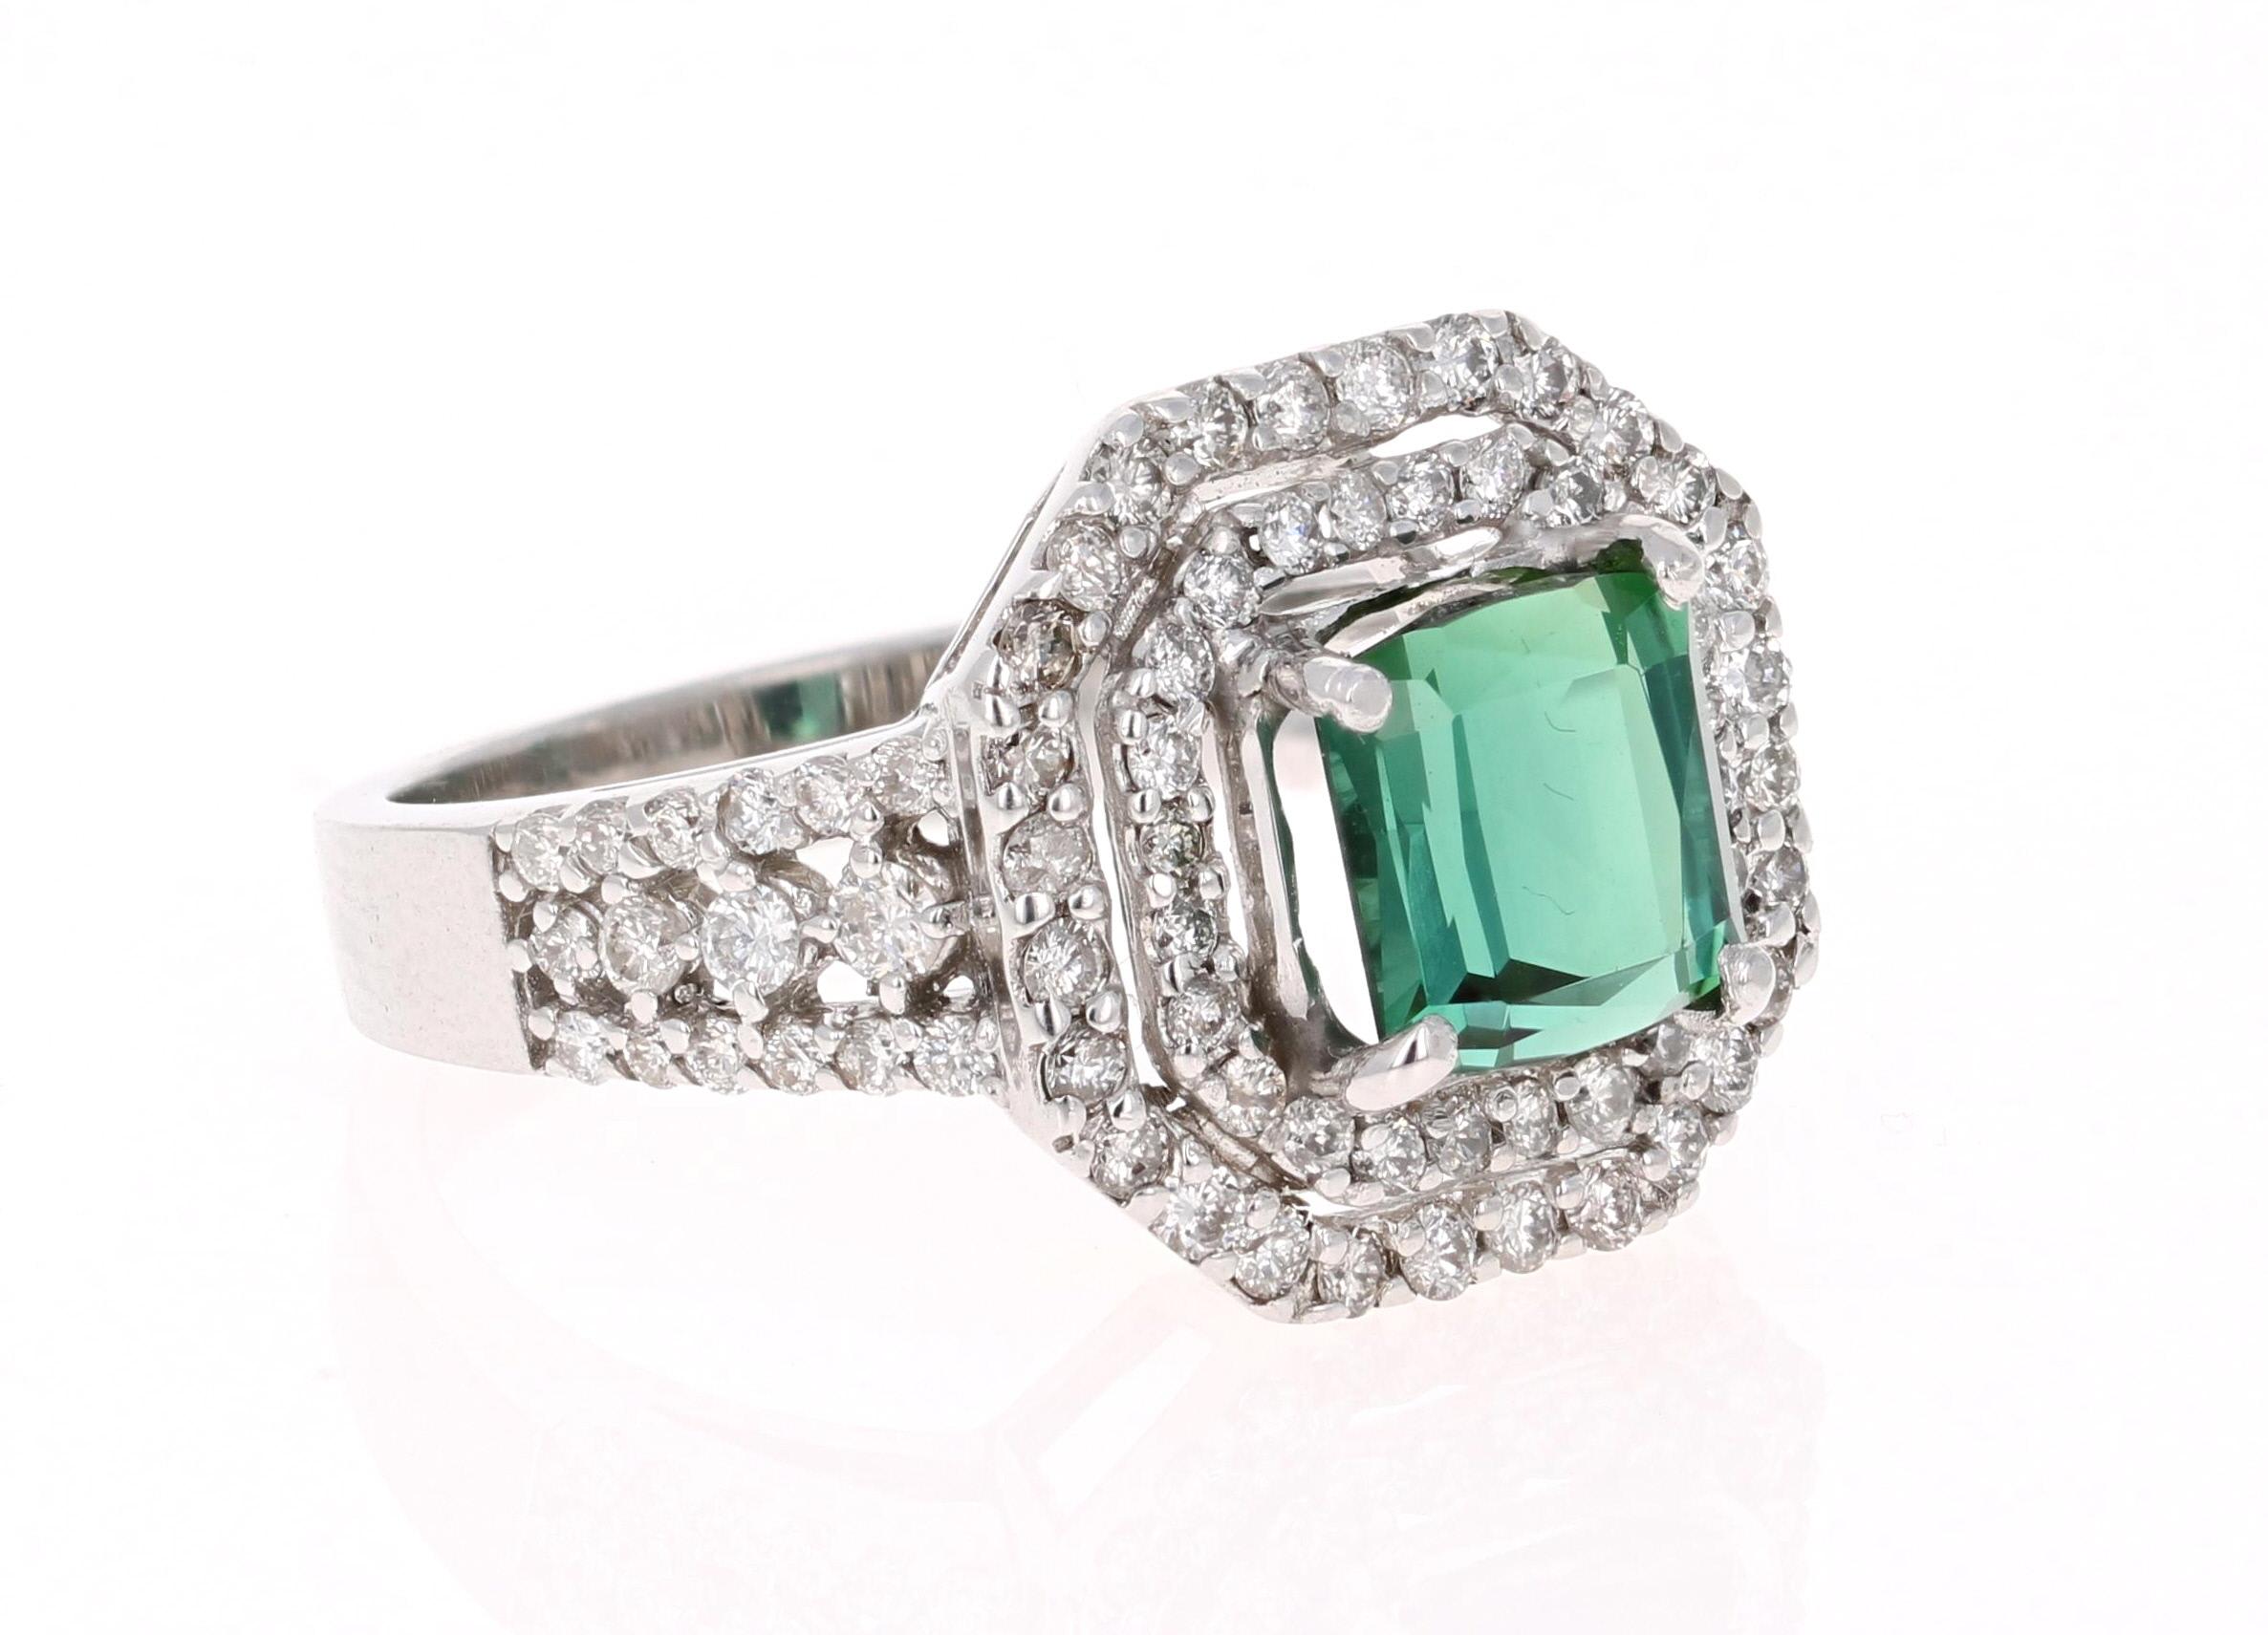 This beautifully designed ring has an Asscher cut Green Tourmaline that weighs 2.15Carats and is surrounded by 84 Round Cut Diamonds that weigh 0.89 Carats (Clarity: SI, Color: F). The total carat weight of the ring is 3.04 Carats. 
The ring is made